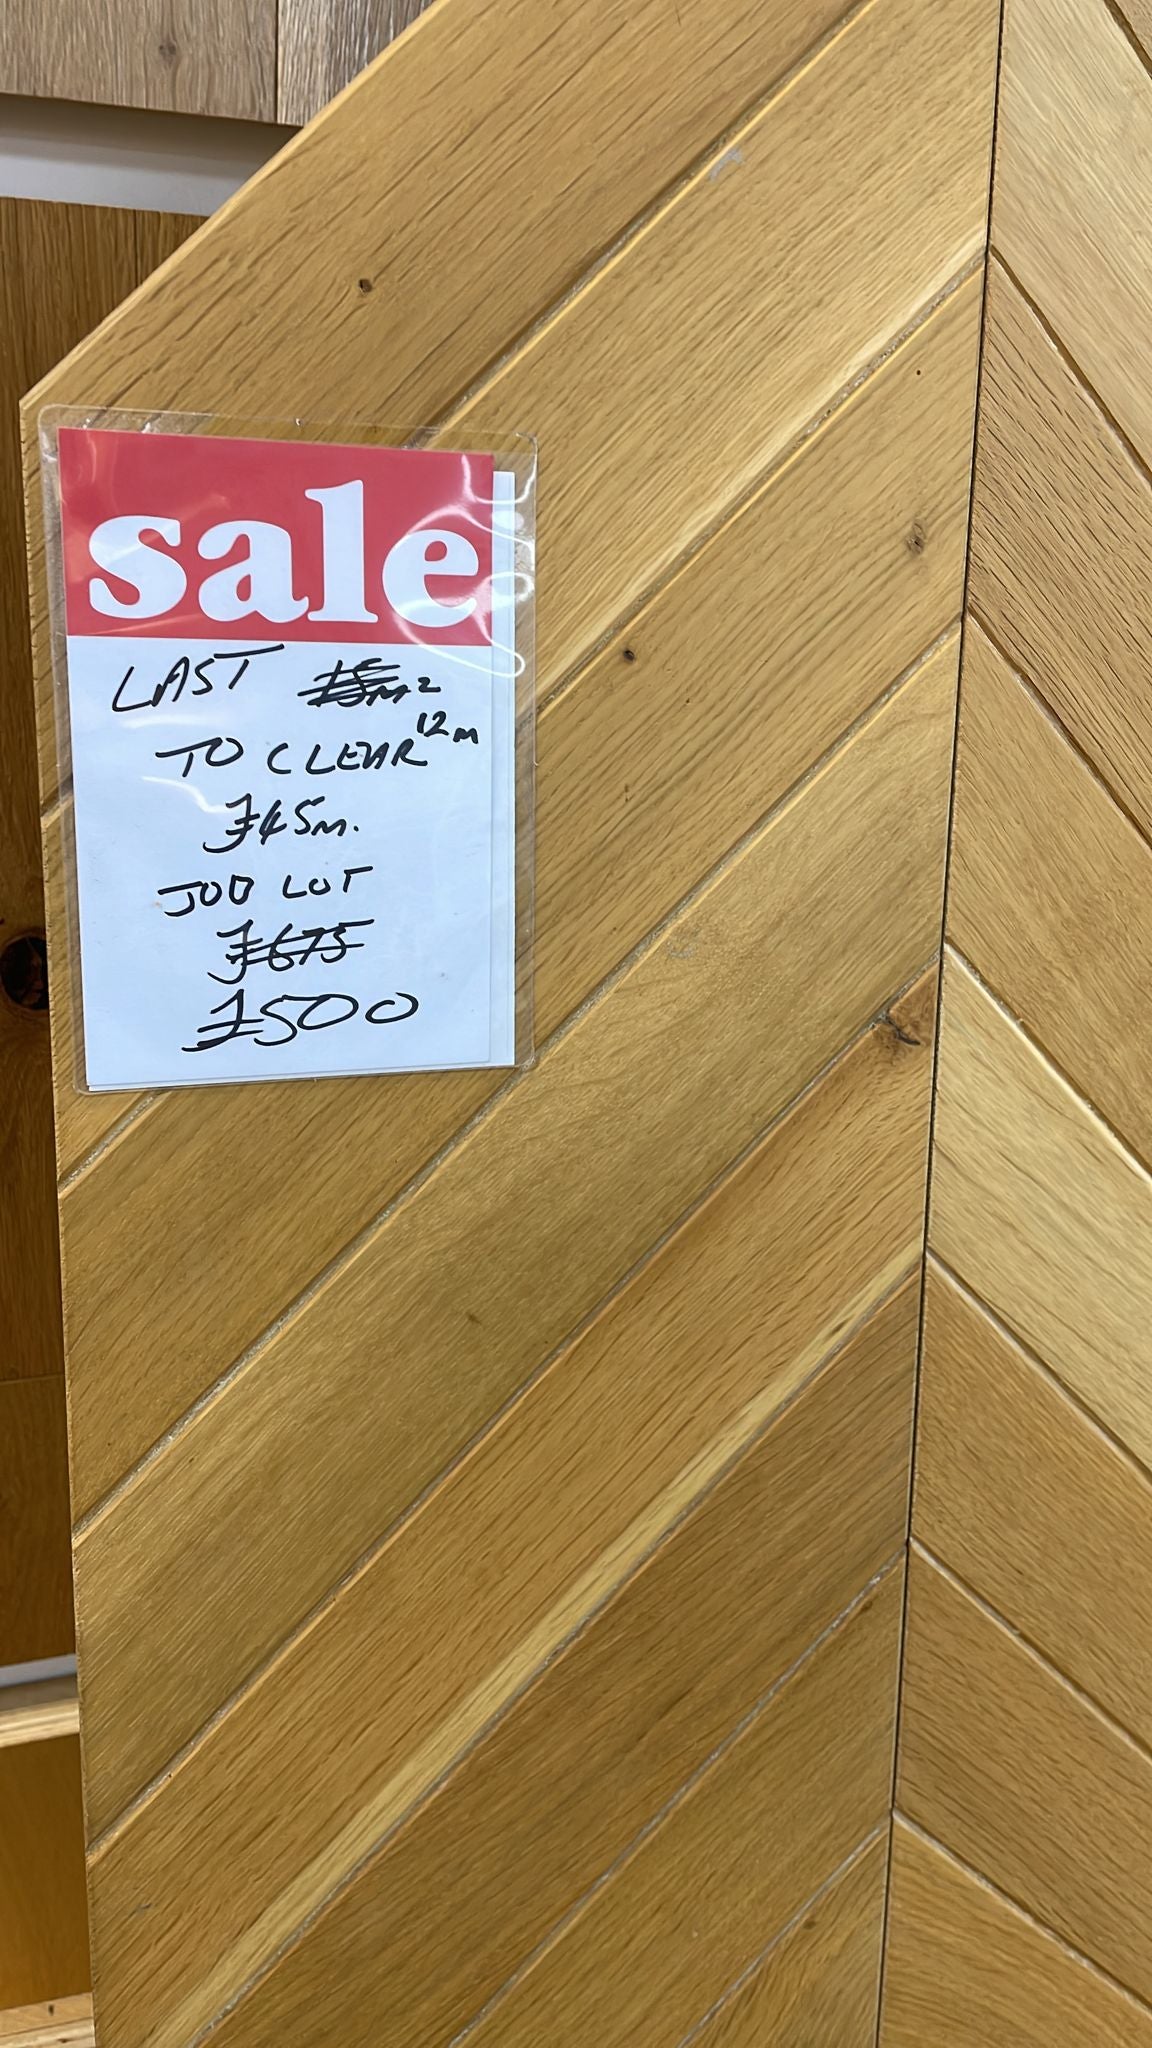 CLEARANCE 12m2 of Natural Oak Chevron Engineered Flooring  ONLY £500